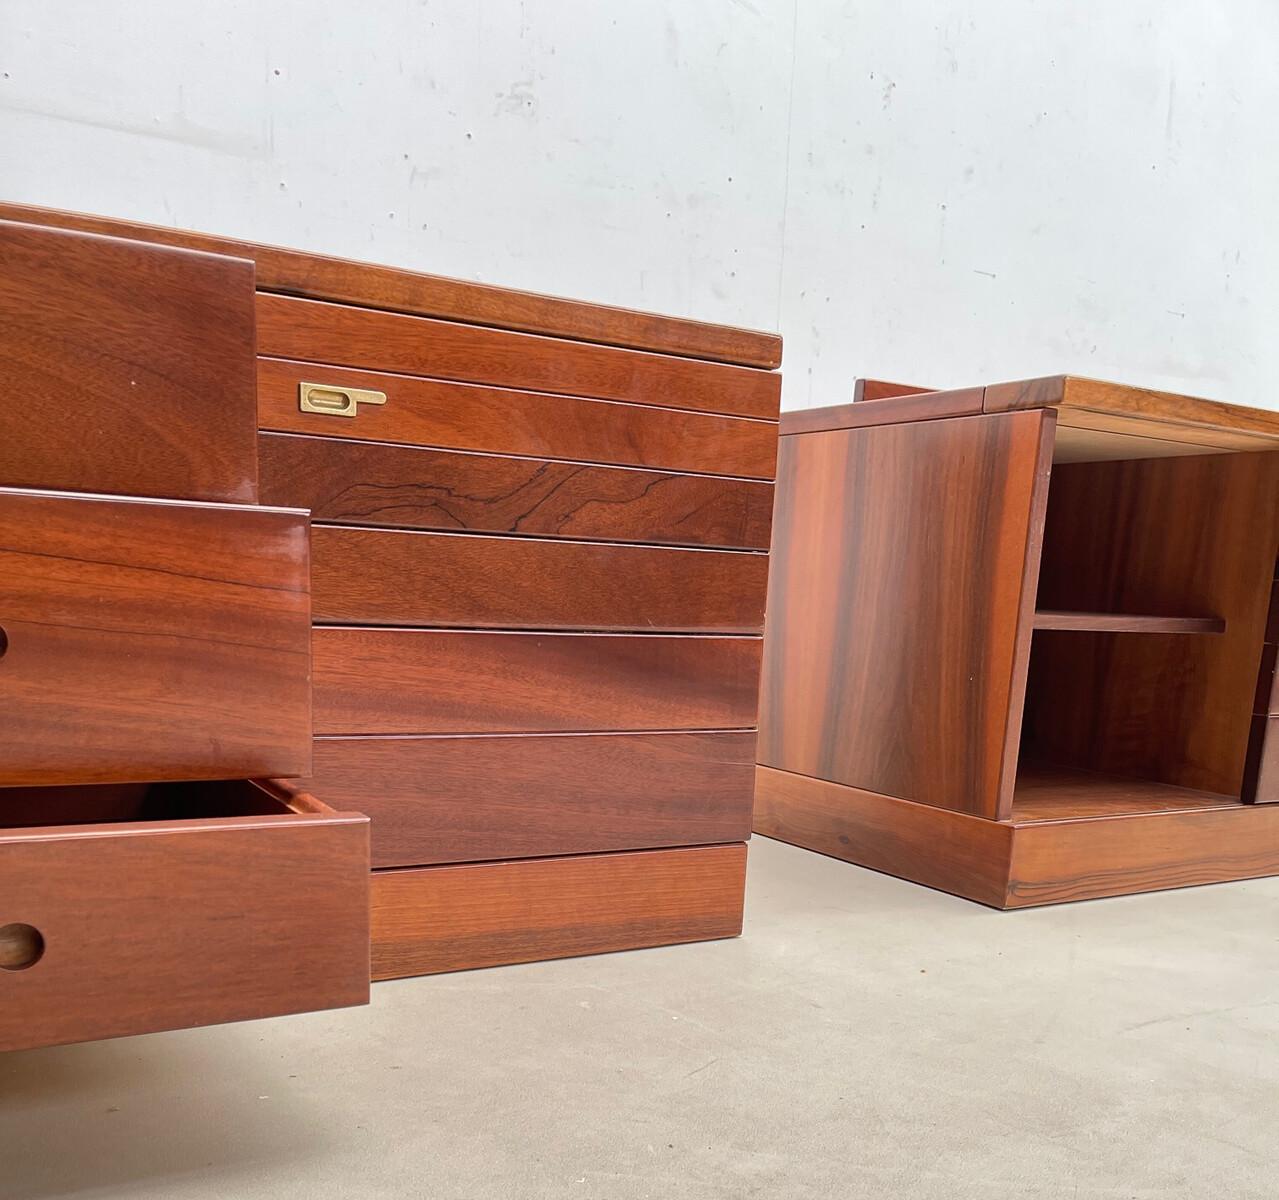 Italian Mid-Century Modern Pair of Wooden Nightstands, Italy, 1970s For Sale